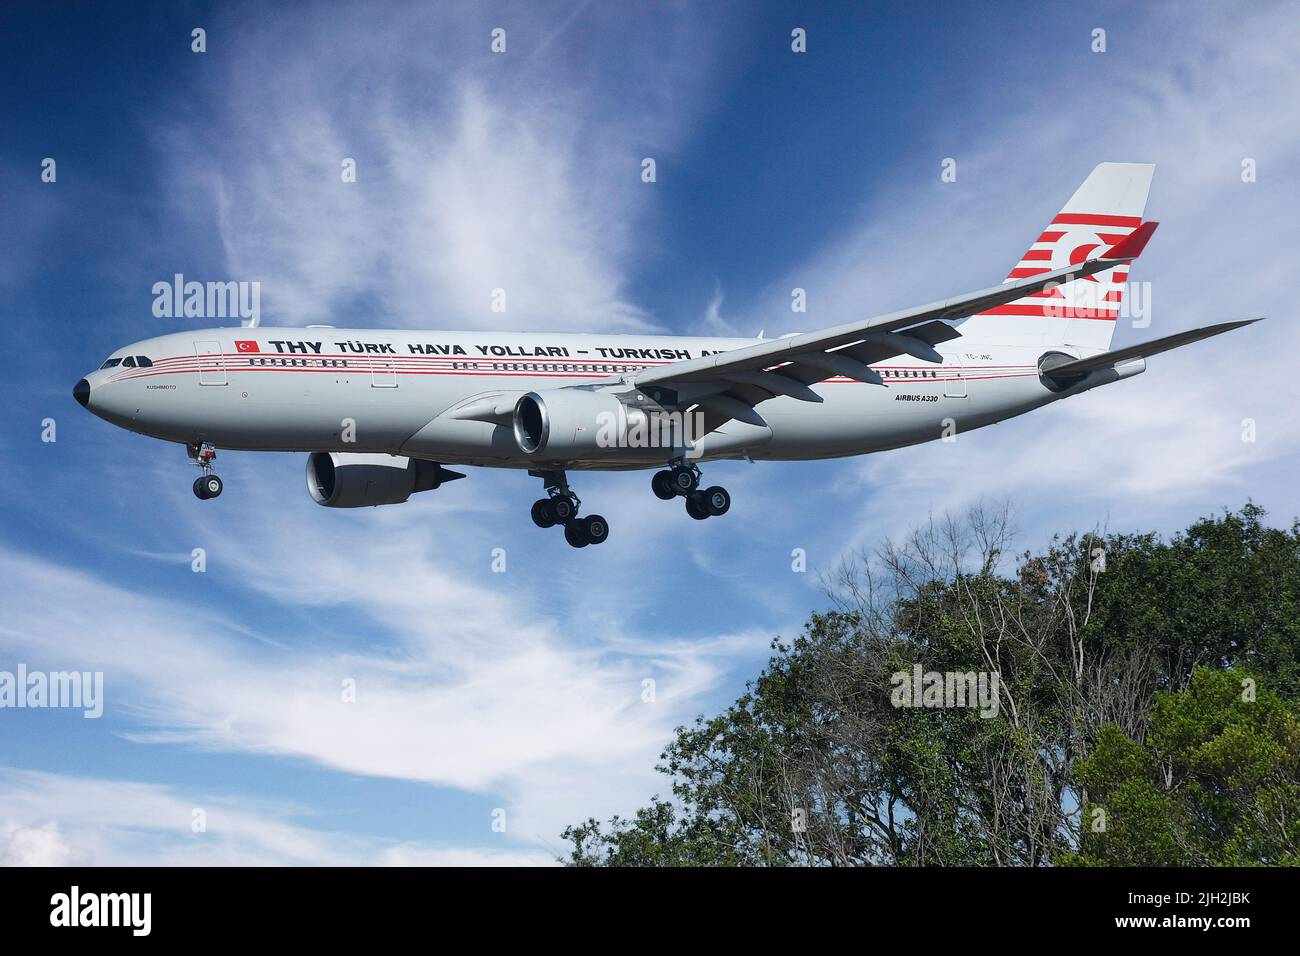 Fiumicino Airport, Italy. 14th July, 2022. Airbus A330 Turkish Airlines old livery Turk Hava Yollari .Aircraft to Fiumicino airport. Fiumicino (Italy), 14th July, 2022. Credit: massimo insabato/Alamy Live News Stock Photo